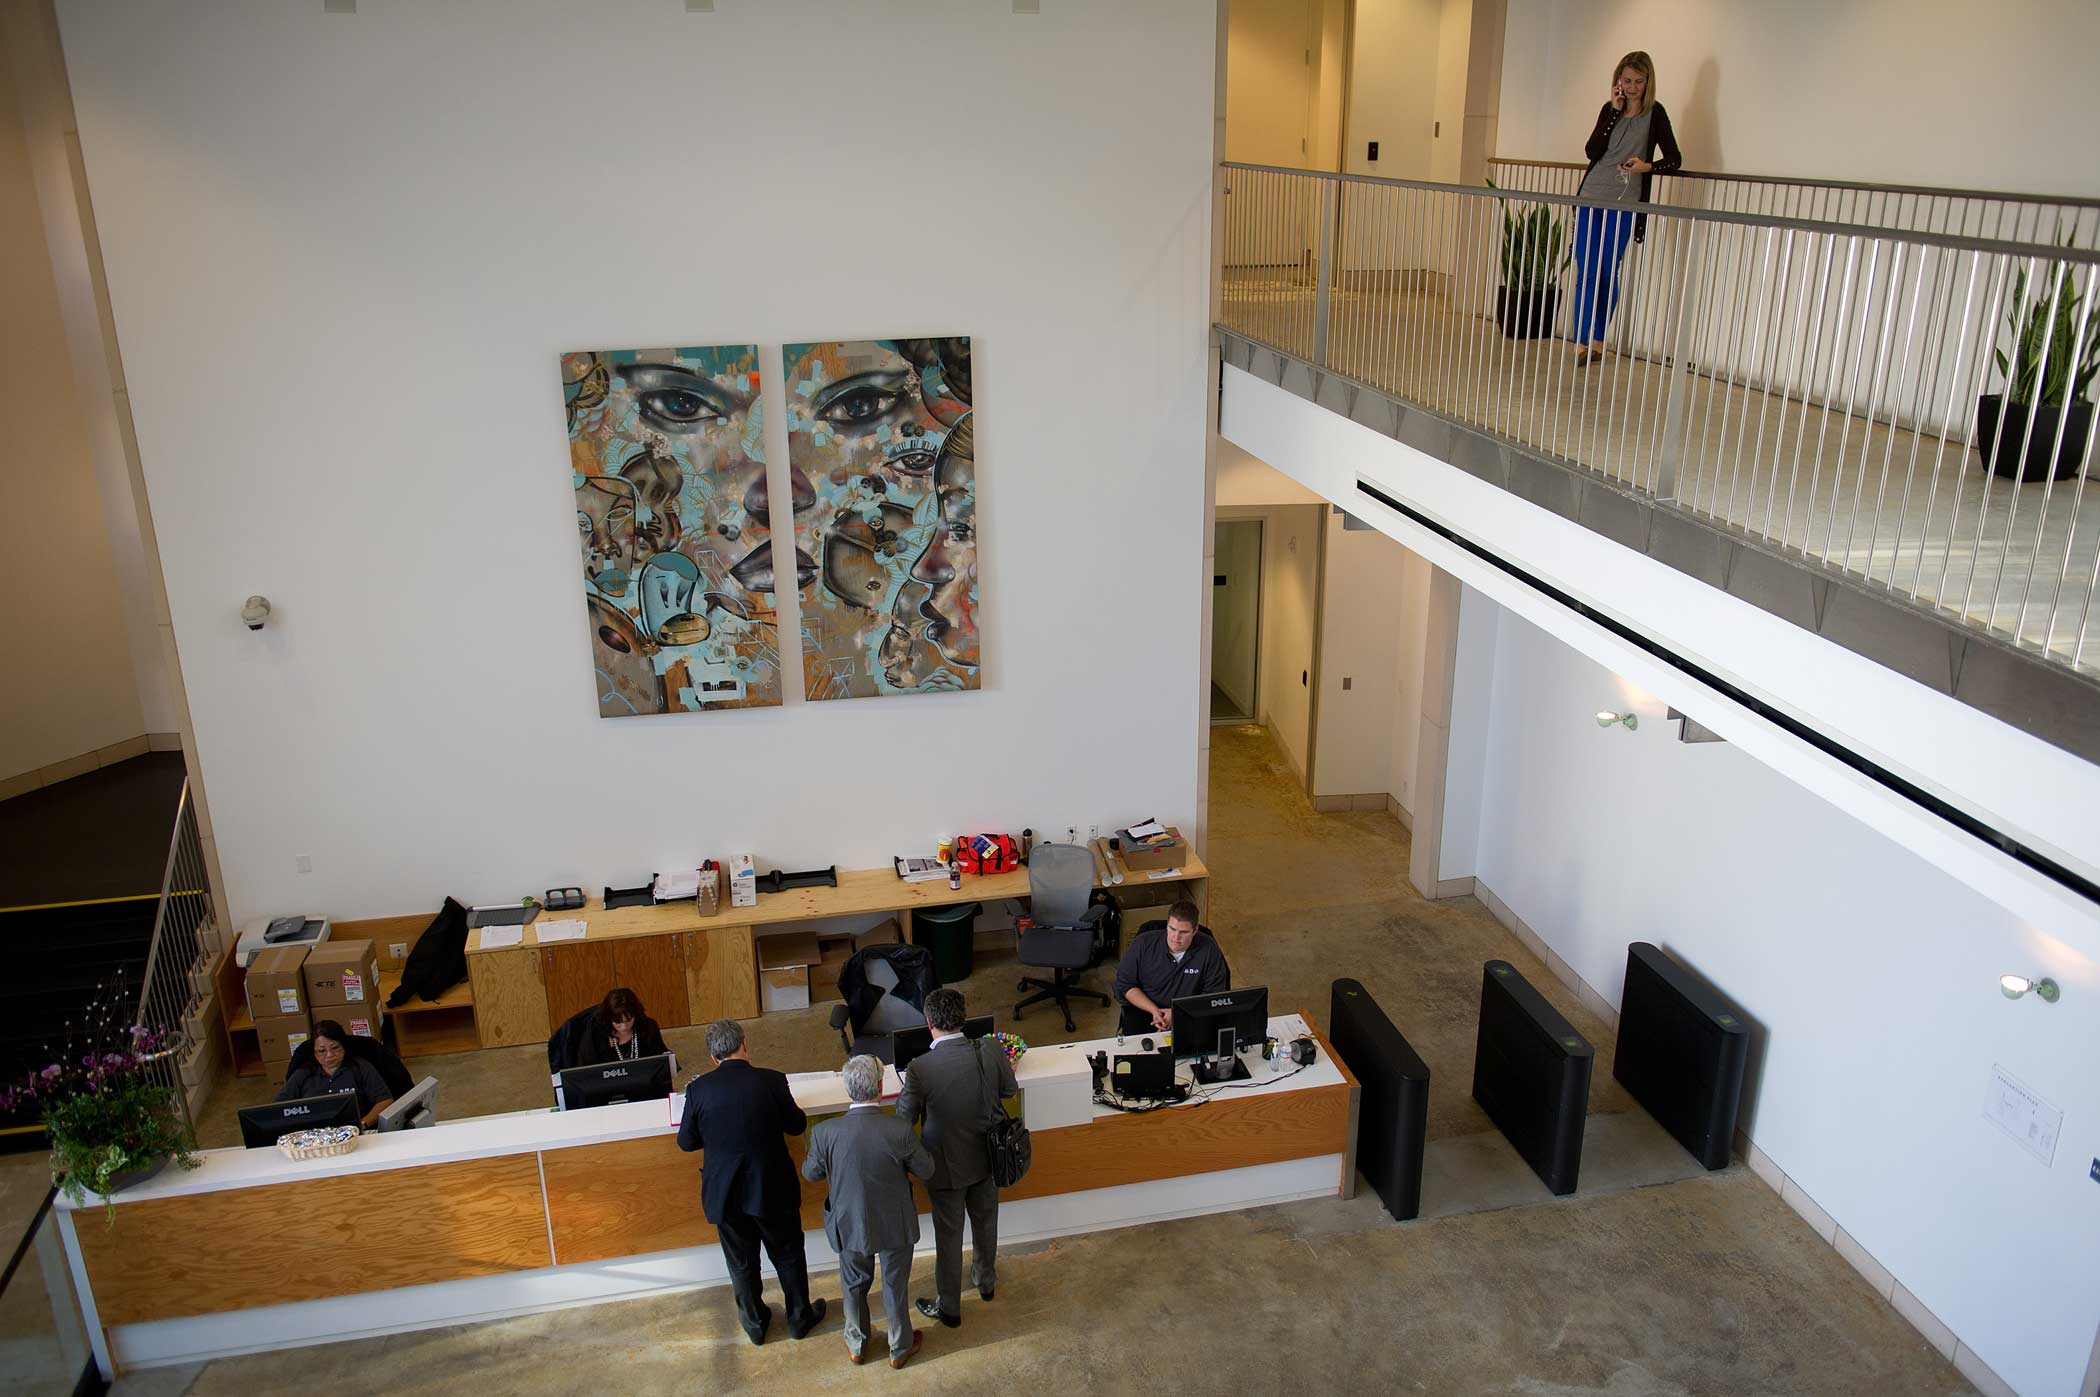 Main Headquarters: The desk is staffed inside the lobby area of the main Facebook campus.